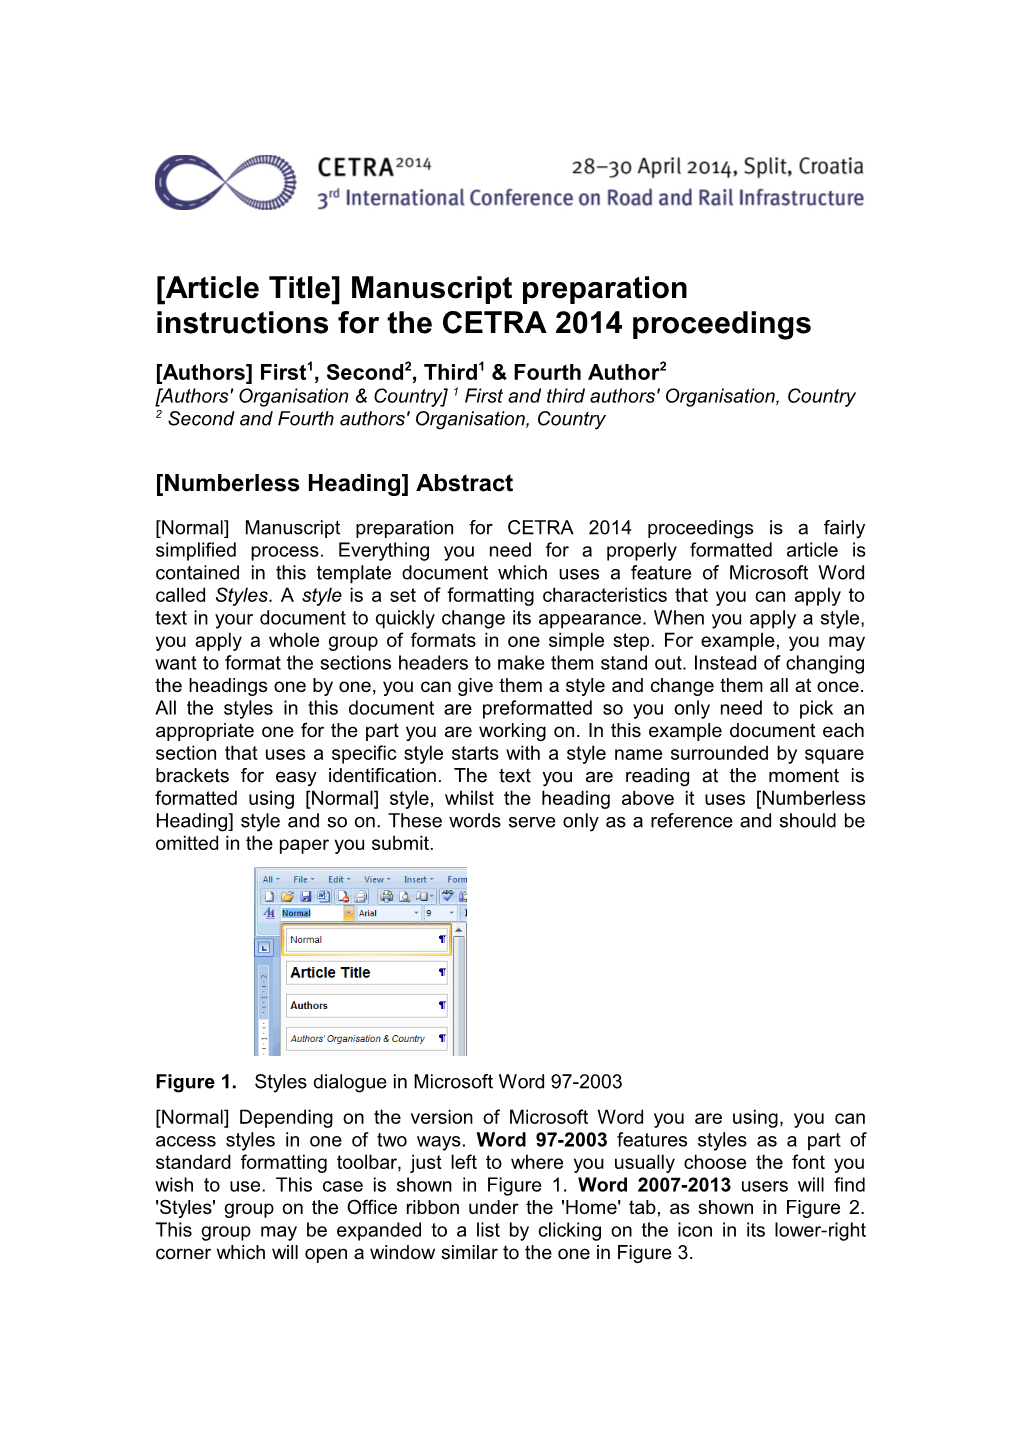 Article Title Manuscript Preparation Instructions for the CETRA 2014 Proceedings